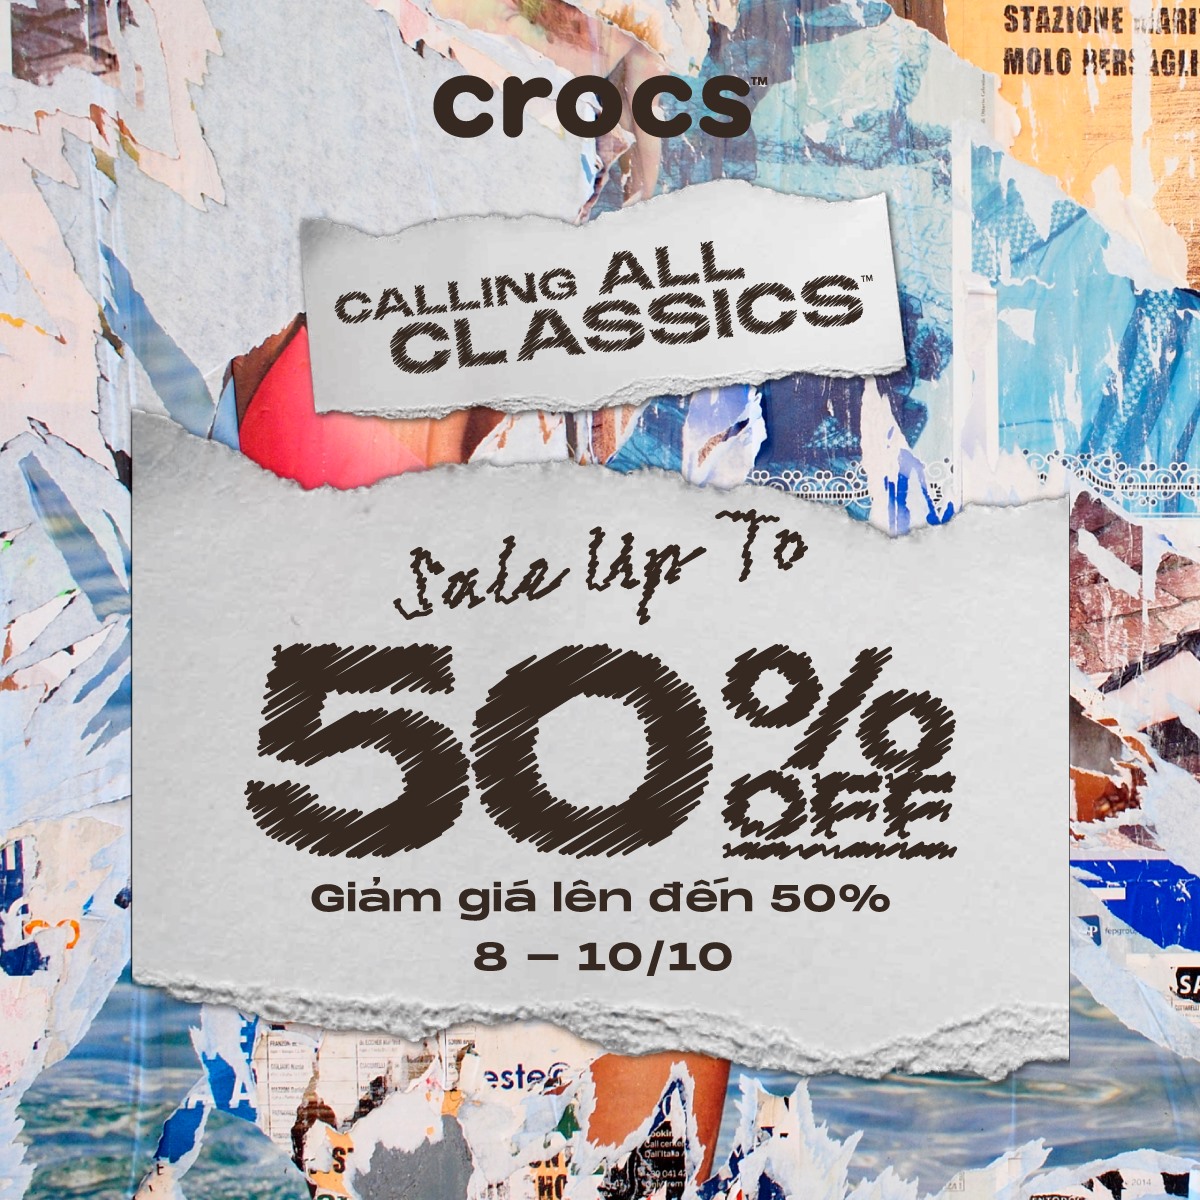 SHOPPING DAY 10.10 – CROCS SALE OFF TO 50%